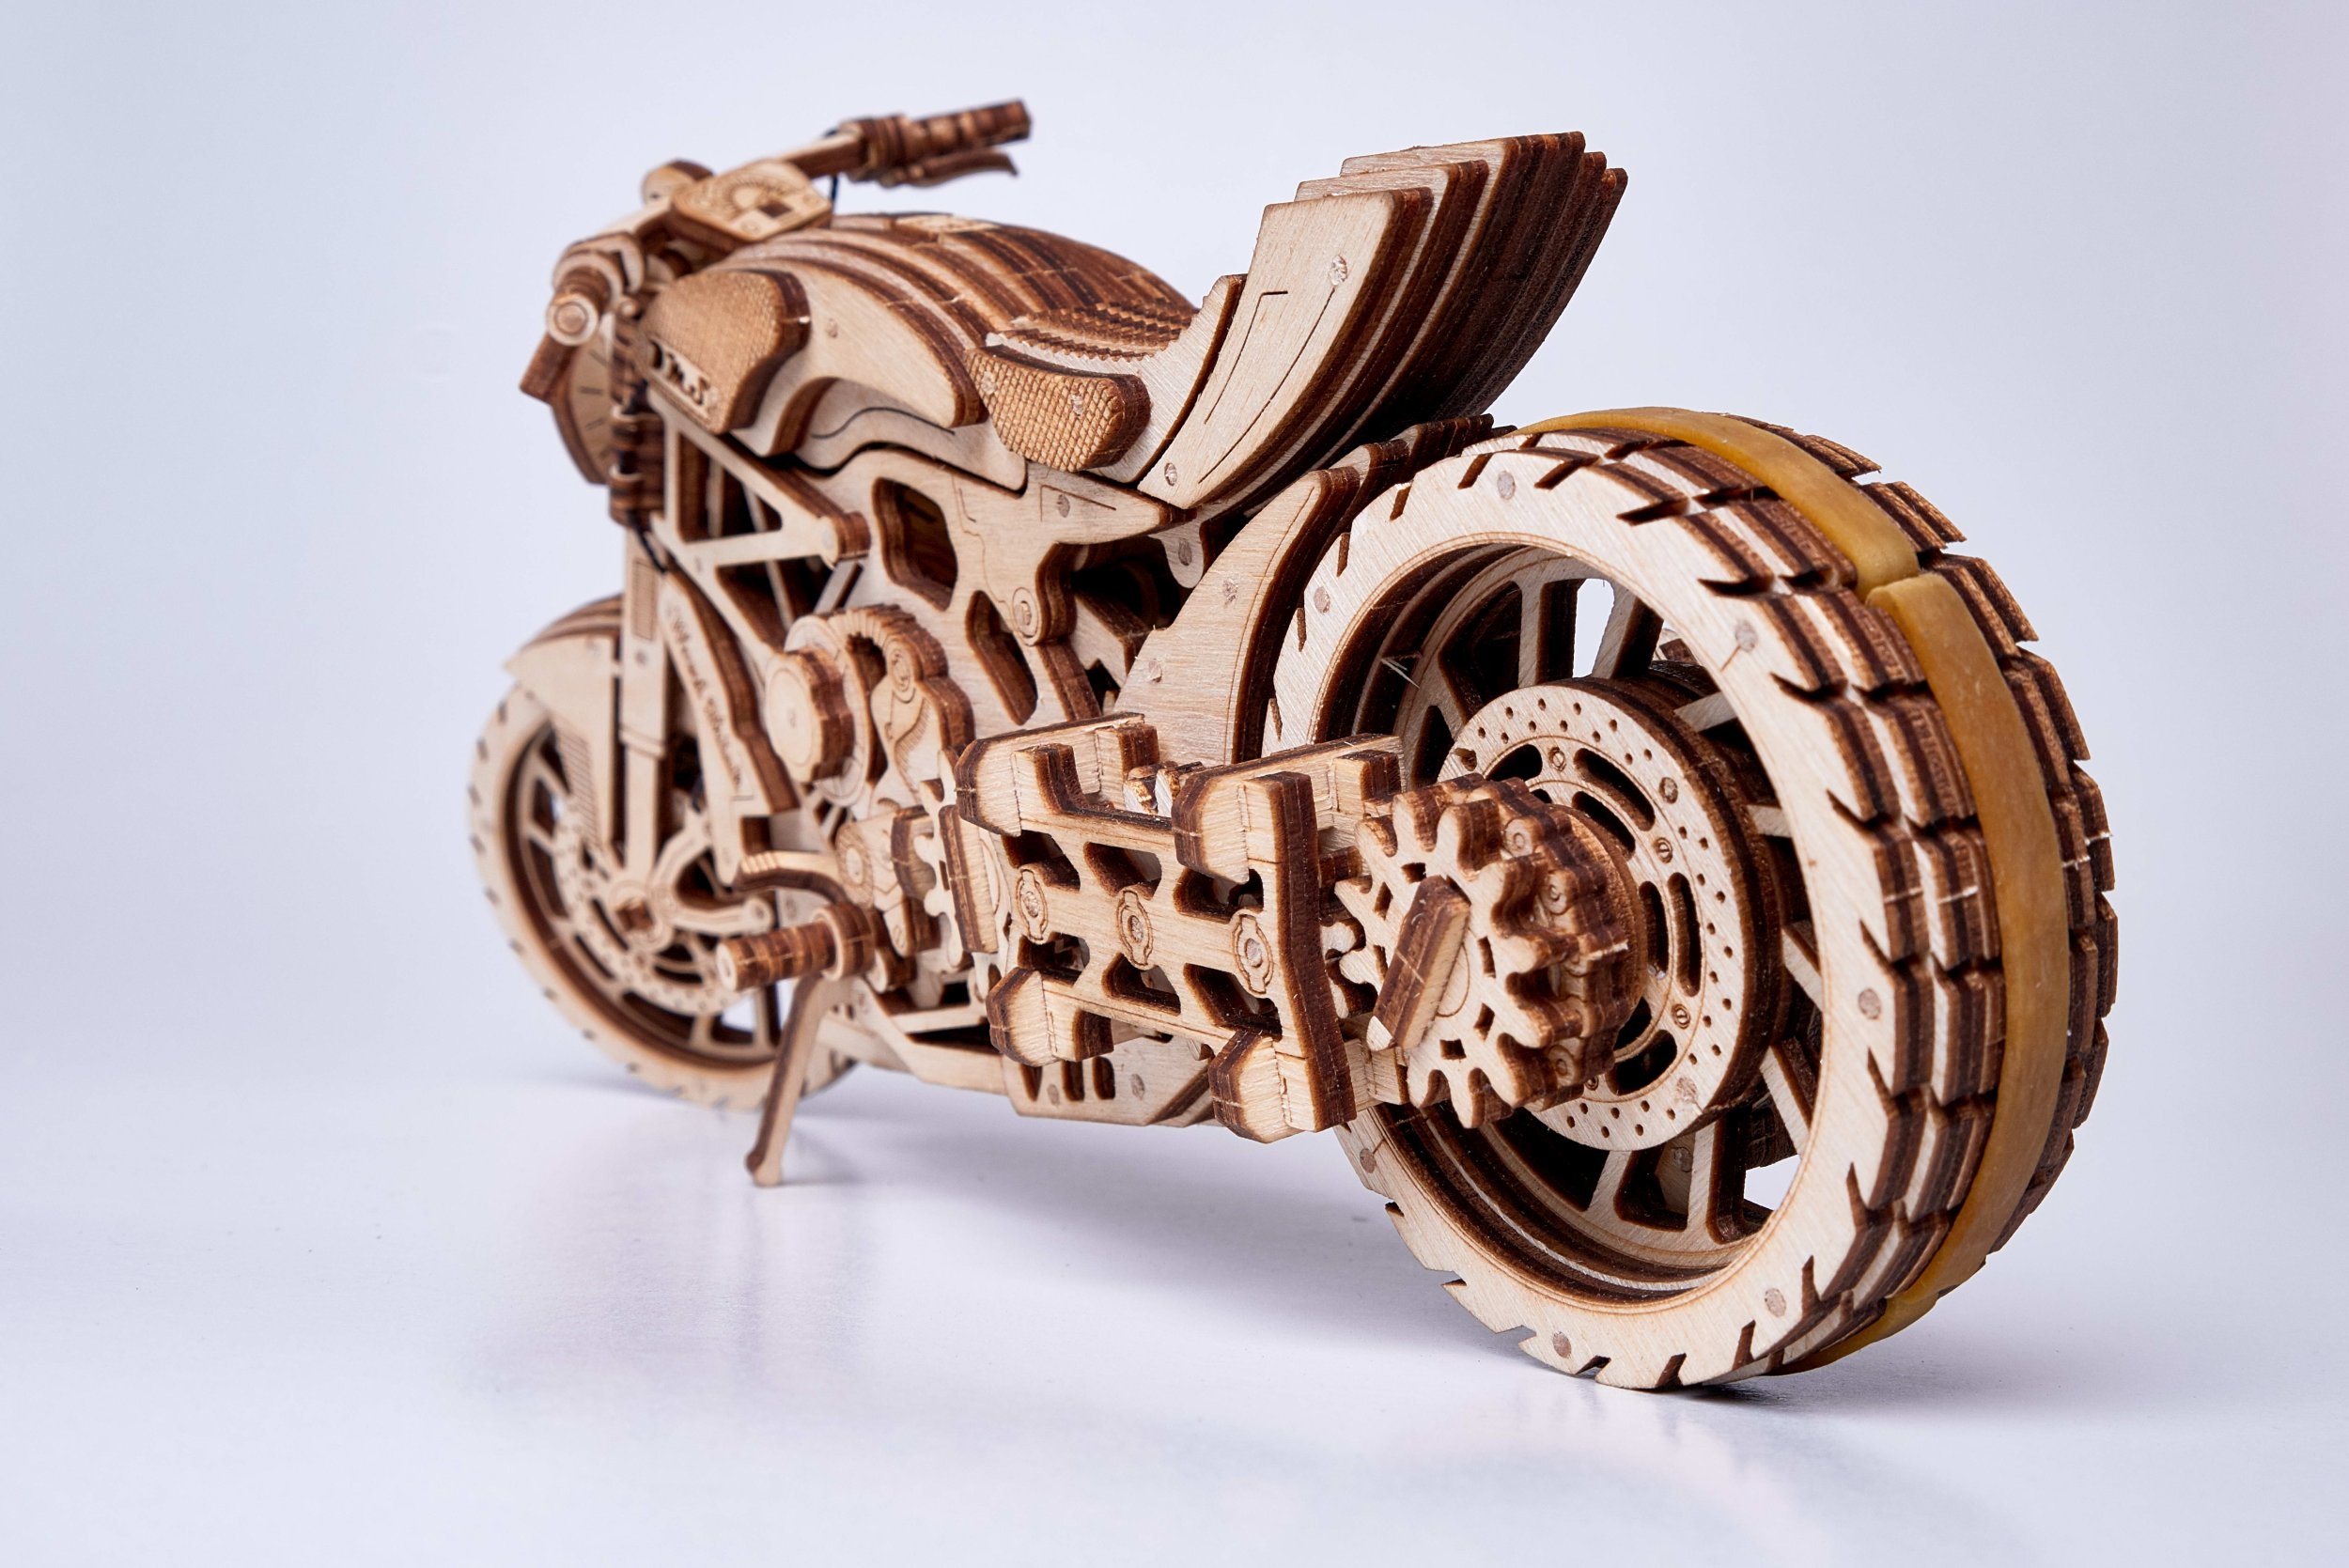 WOOD motorcycle, 203 components at Selva Online